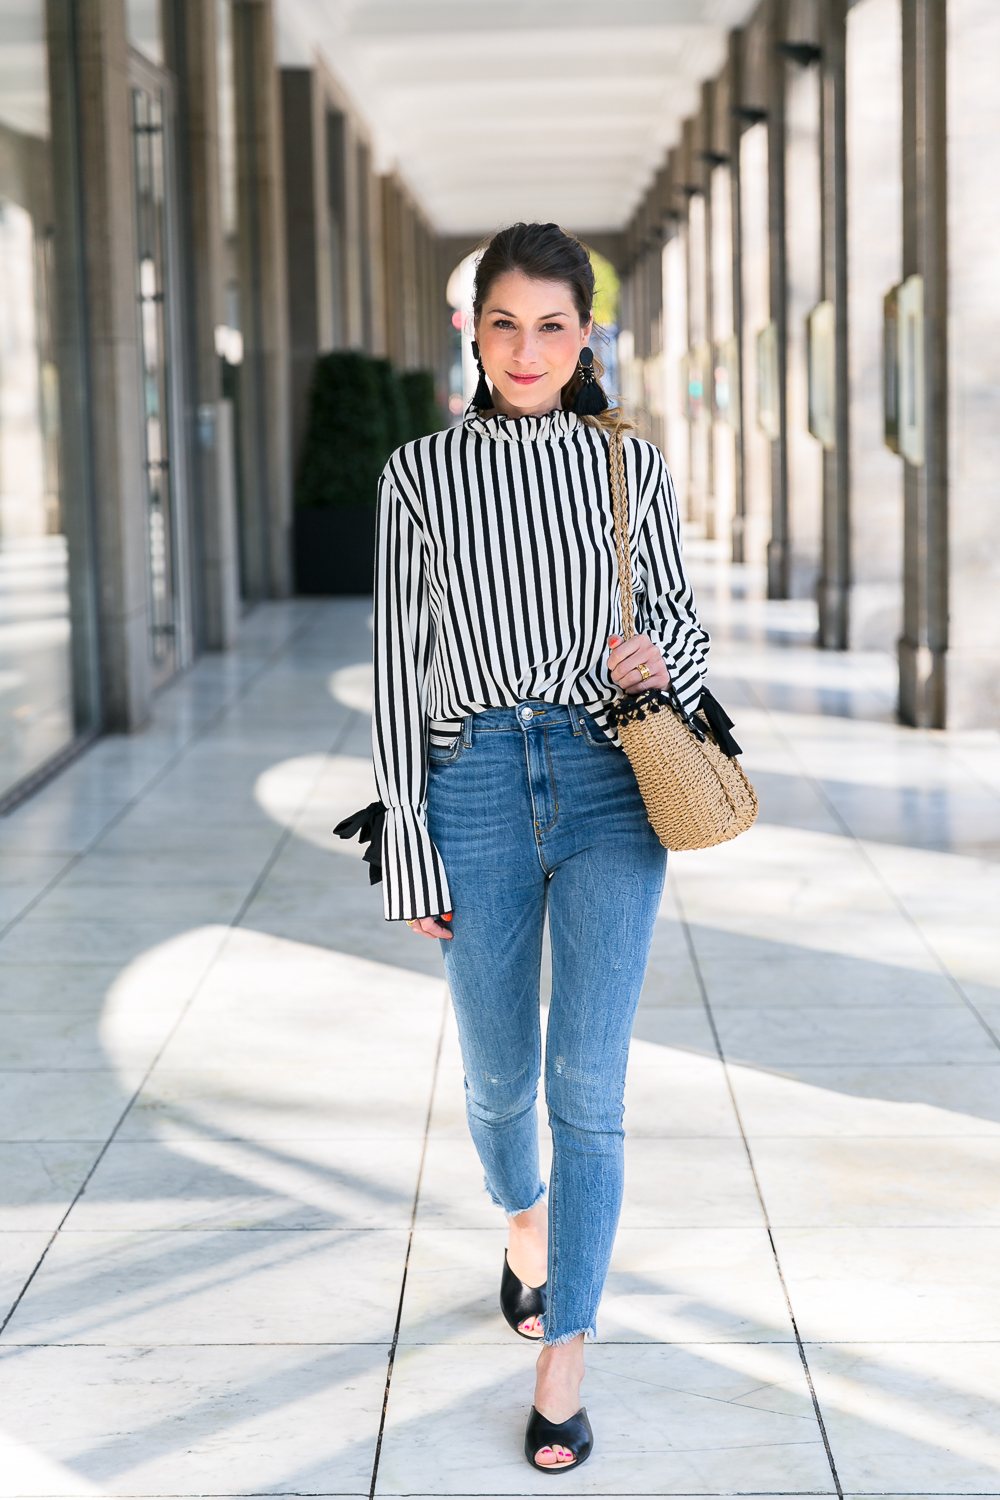 statement sleeves stripes top earrings zara jeans flats basket bag casual chic outfit modeblog